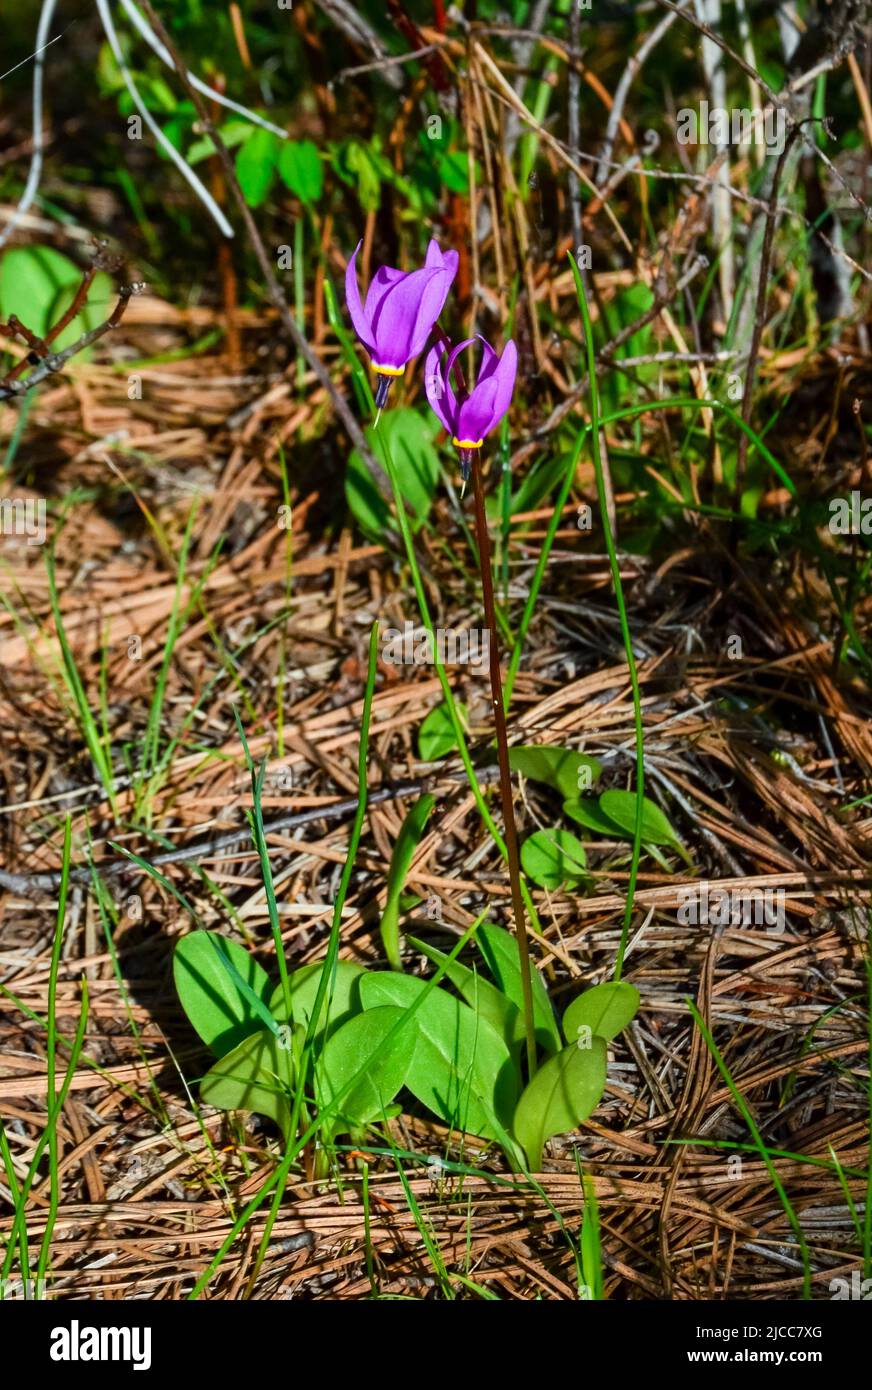 Dodecatheon conjugens, Desert Shooting Star blossoms detail Stock Photo